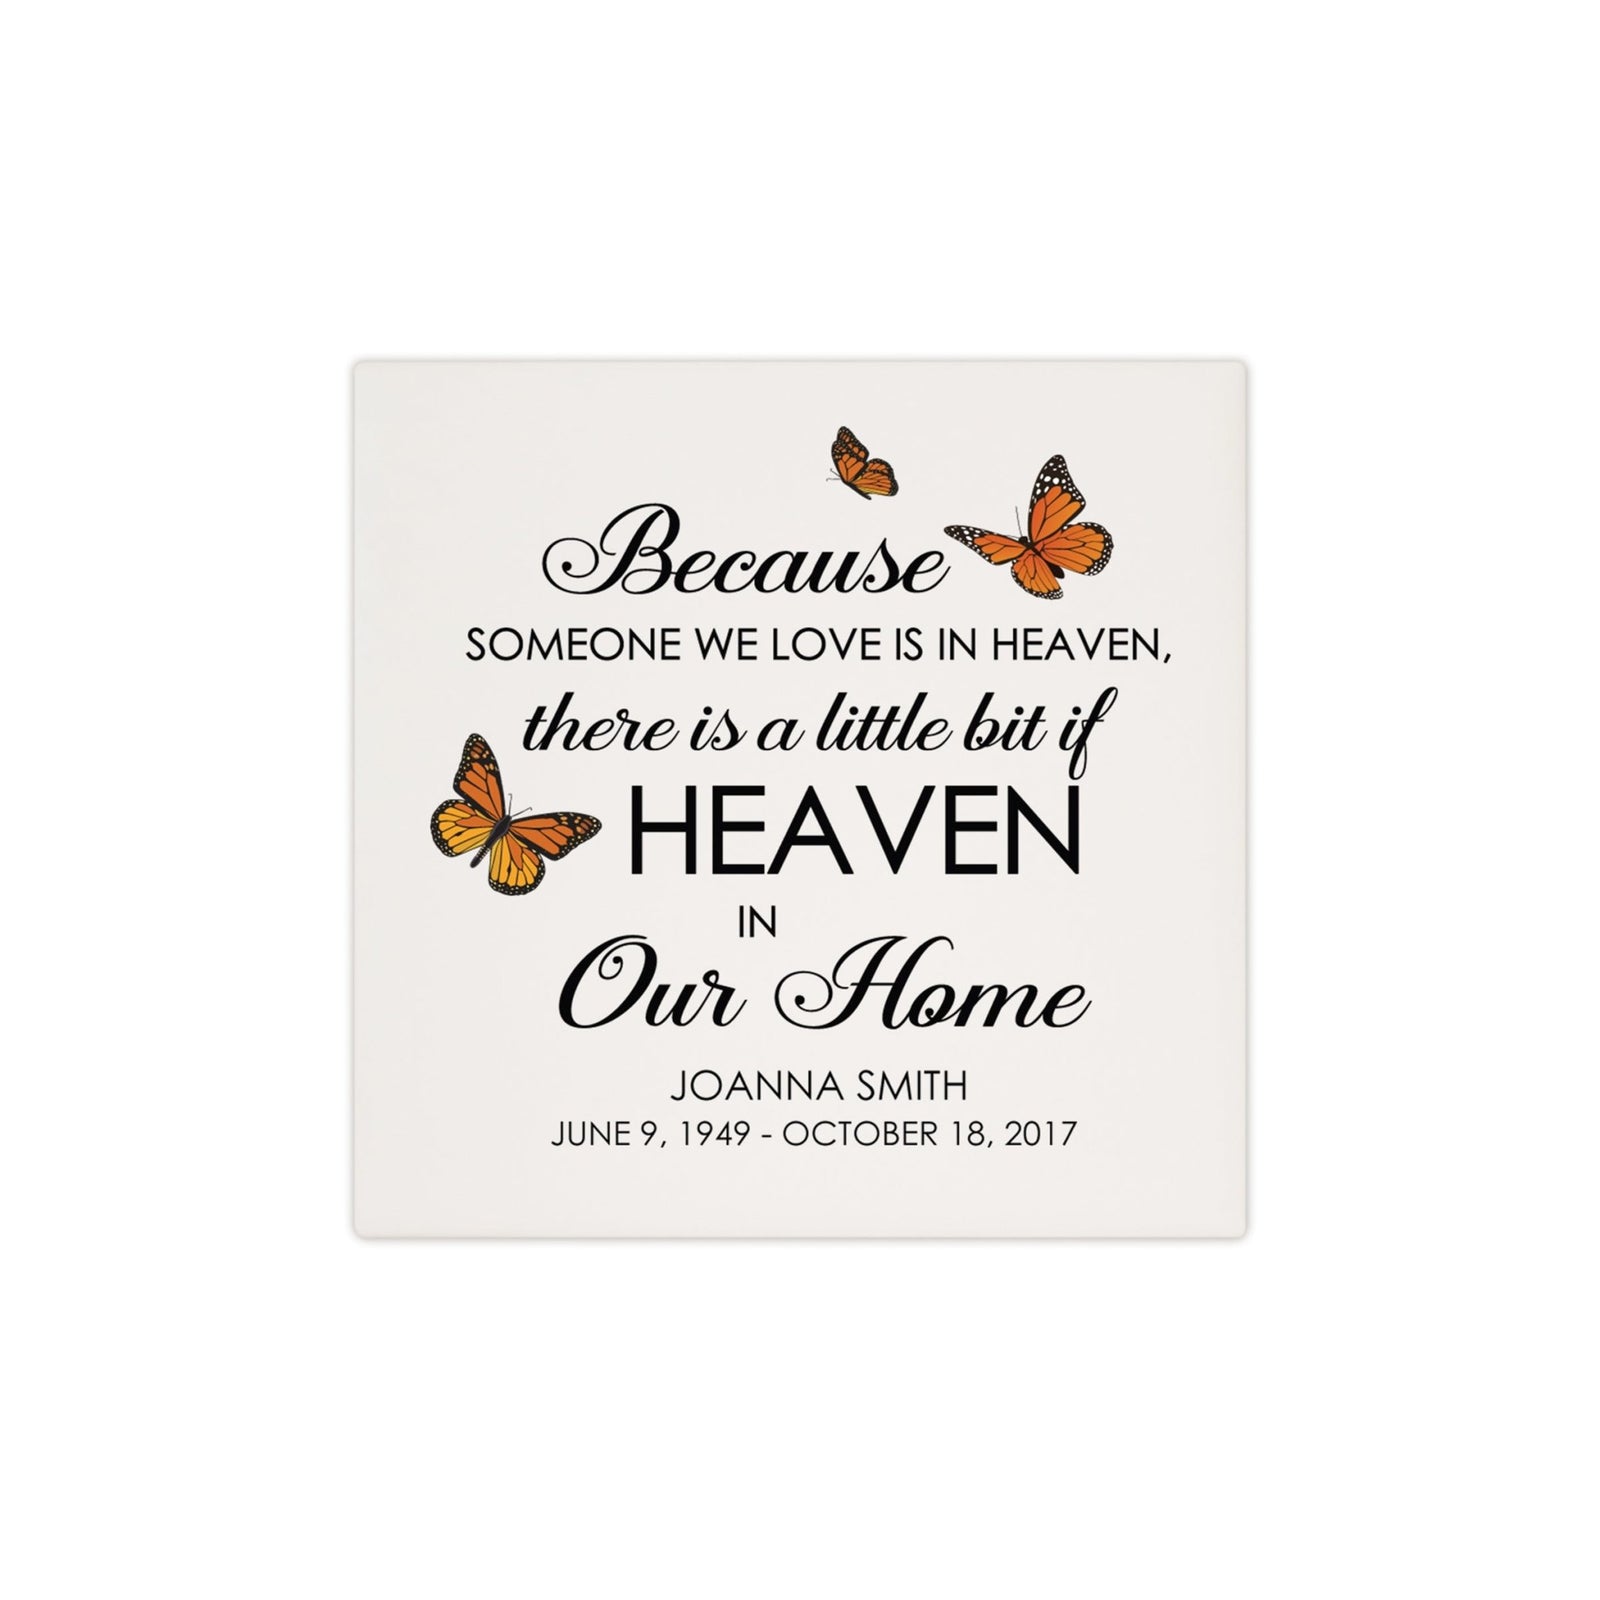 Personalized Memorial Ceramic Trivet for Home Decor - Because Someone We Love - LifeSong Milestones